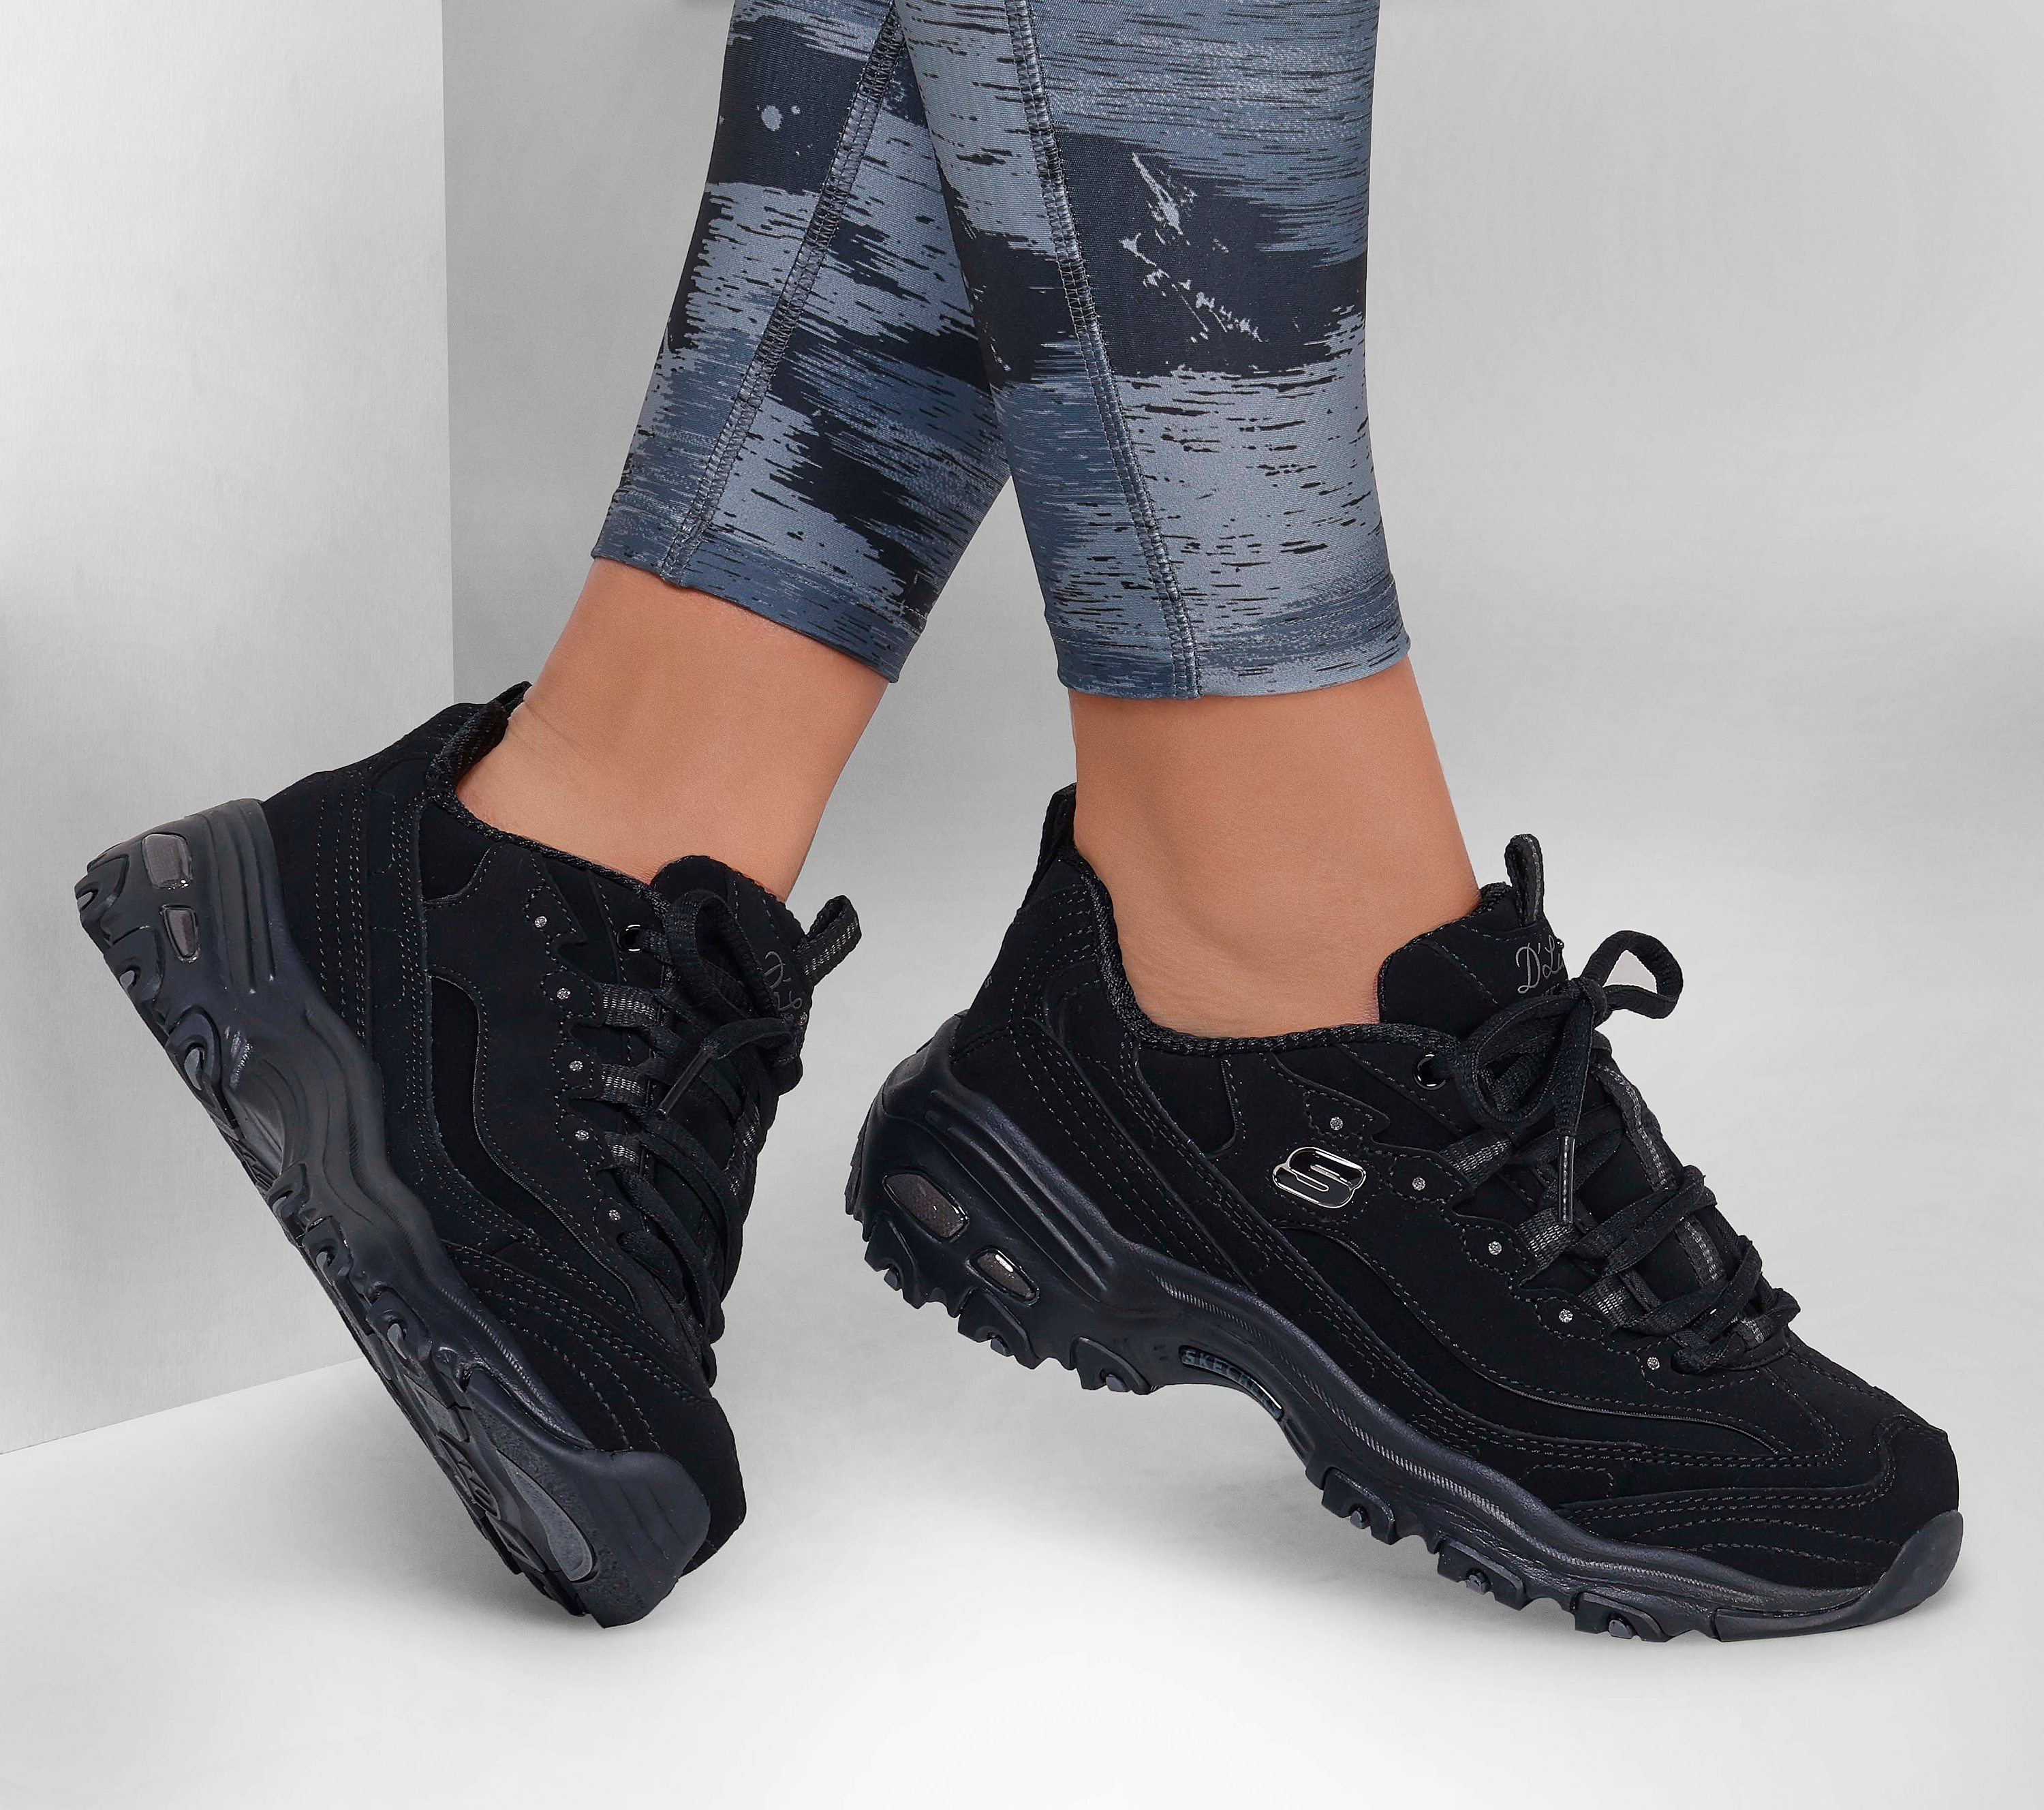 Shop the D'Lites - Play On | SKECHERS